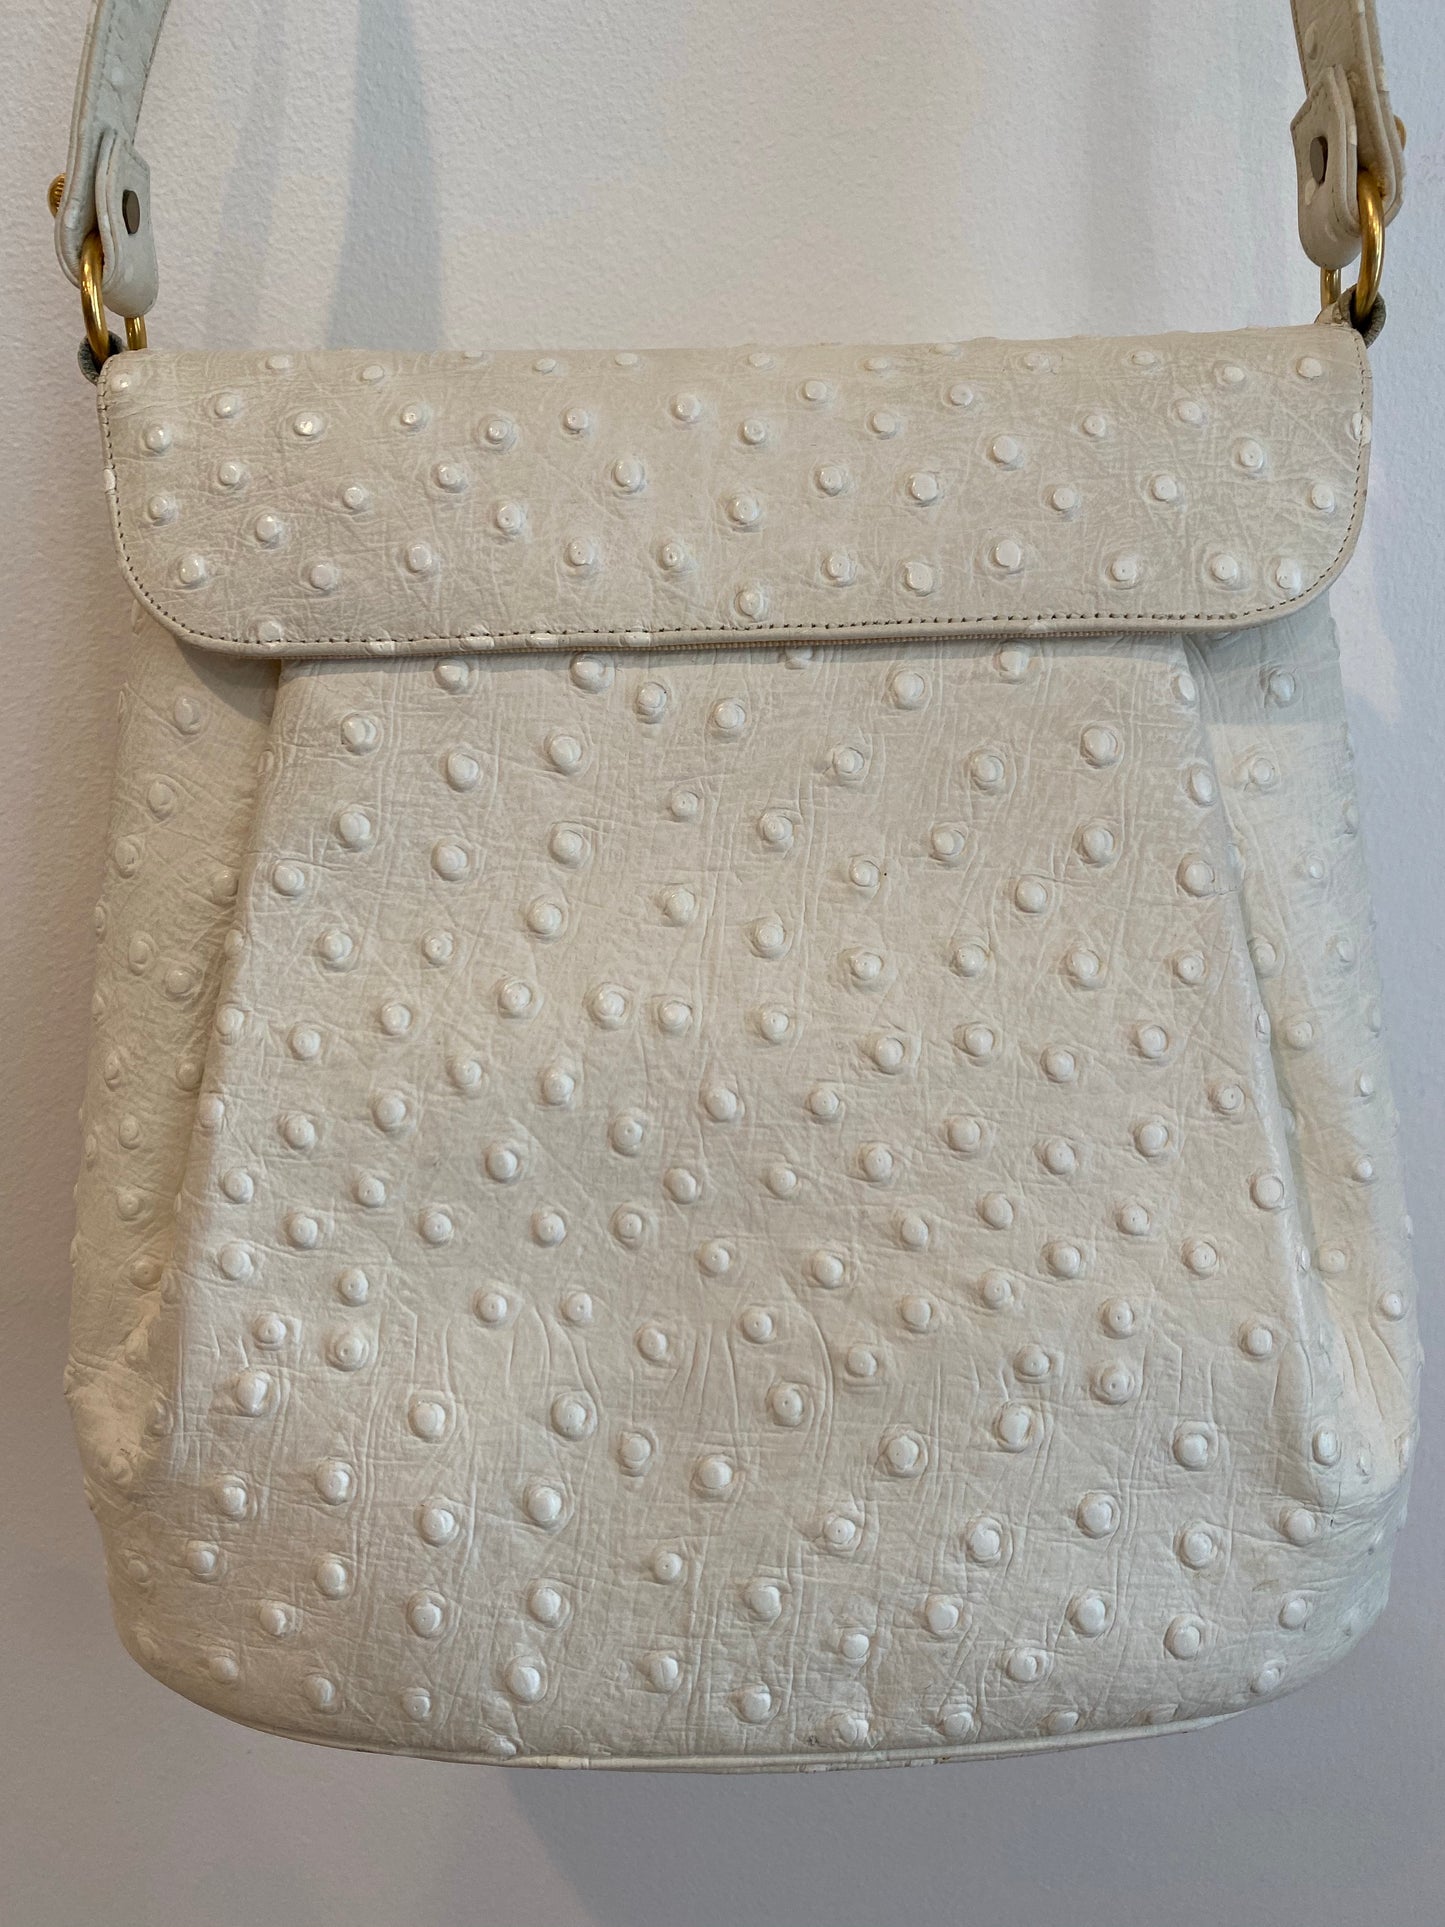 Faux White Ostrich Skin Handbag with gold Clasp